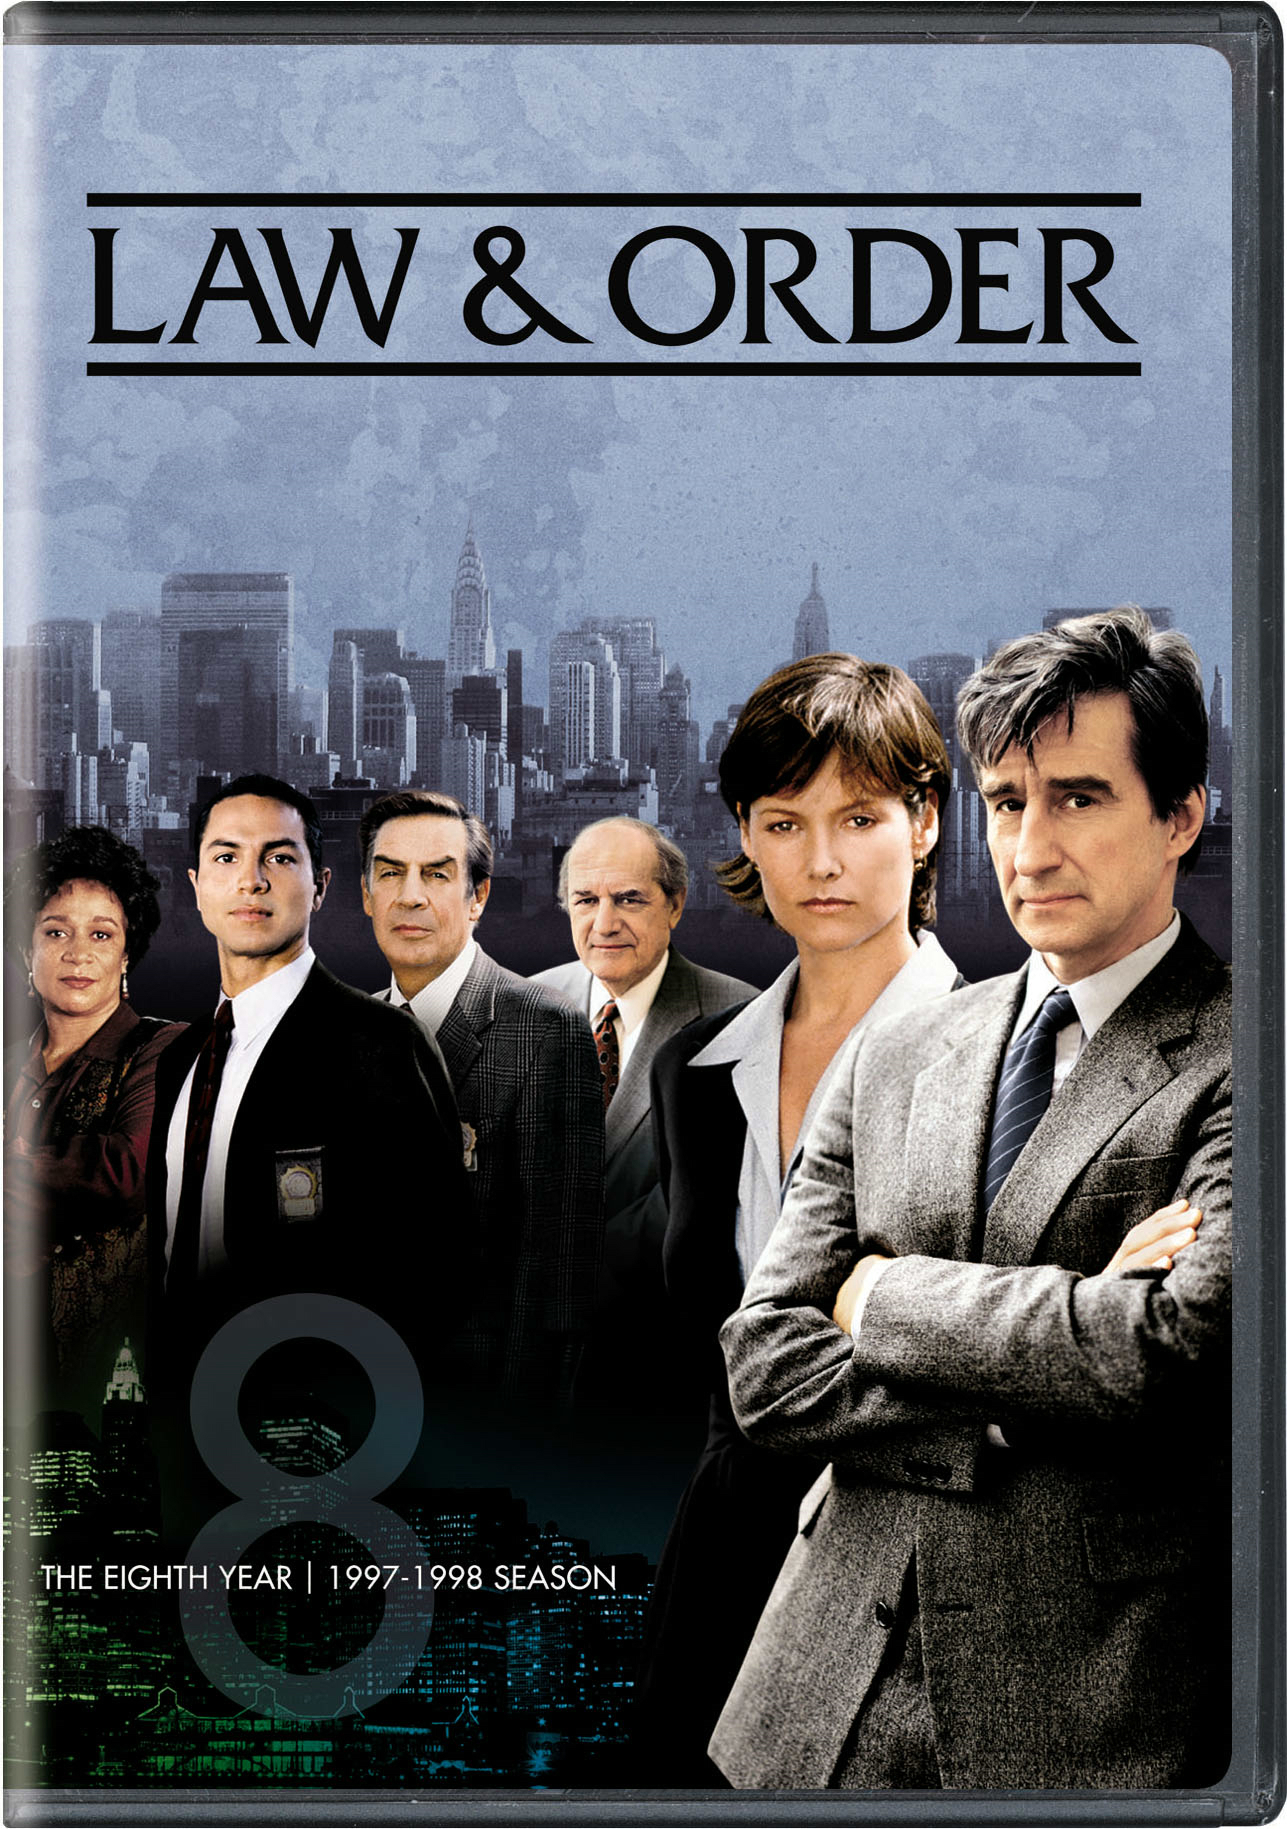 Law & Order: The Eighth Year (Box Set) - DVD [ 1990 ]  - Drama Television On DVD - TV Shows On GRUV